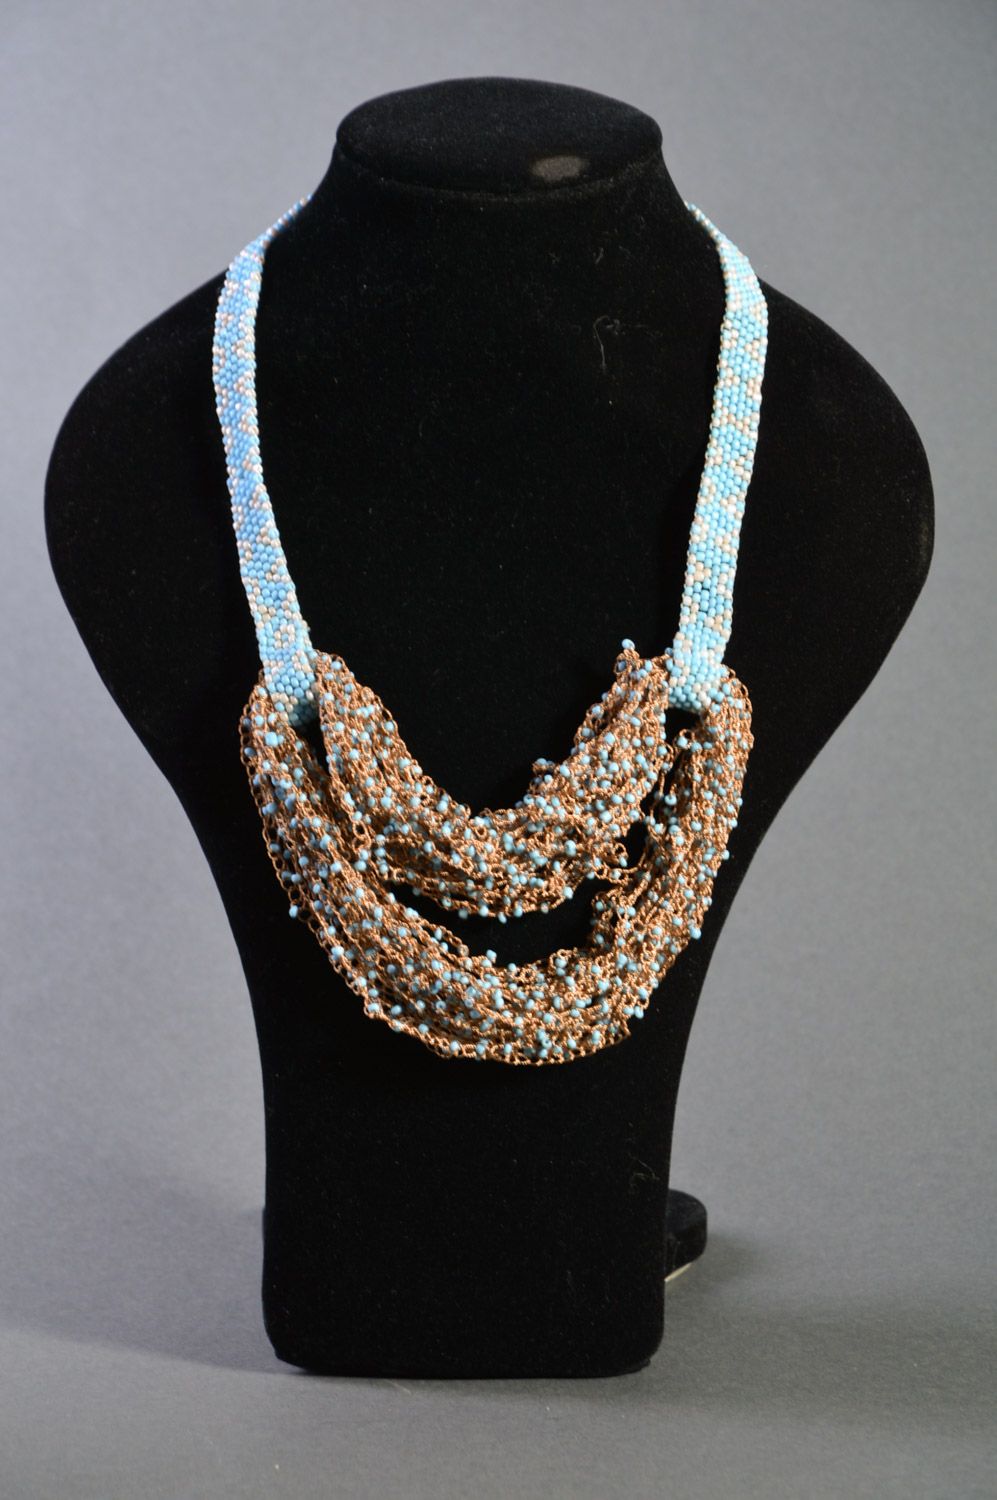 Handmade airy volume necklace woven of blue and brown beads and fishing line photo 3